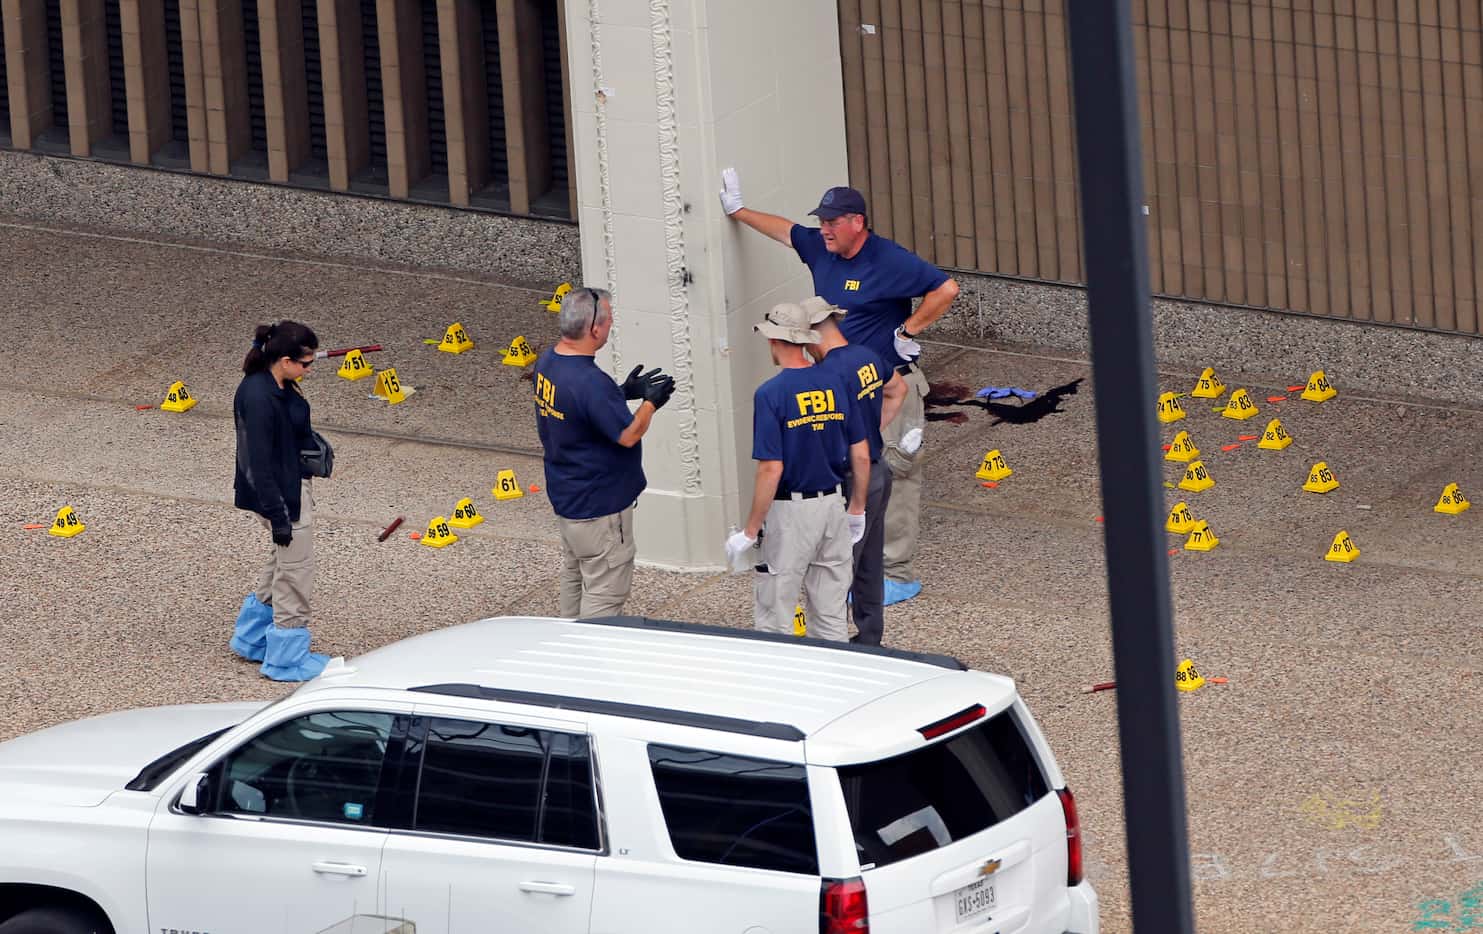 On July 9, two days after the ambush, members of an FBI evidence response team gathered...